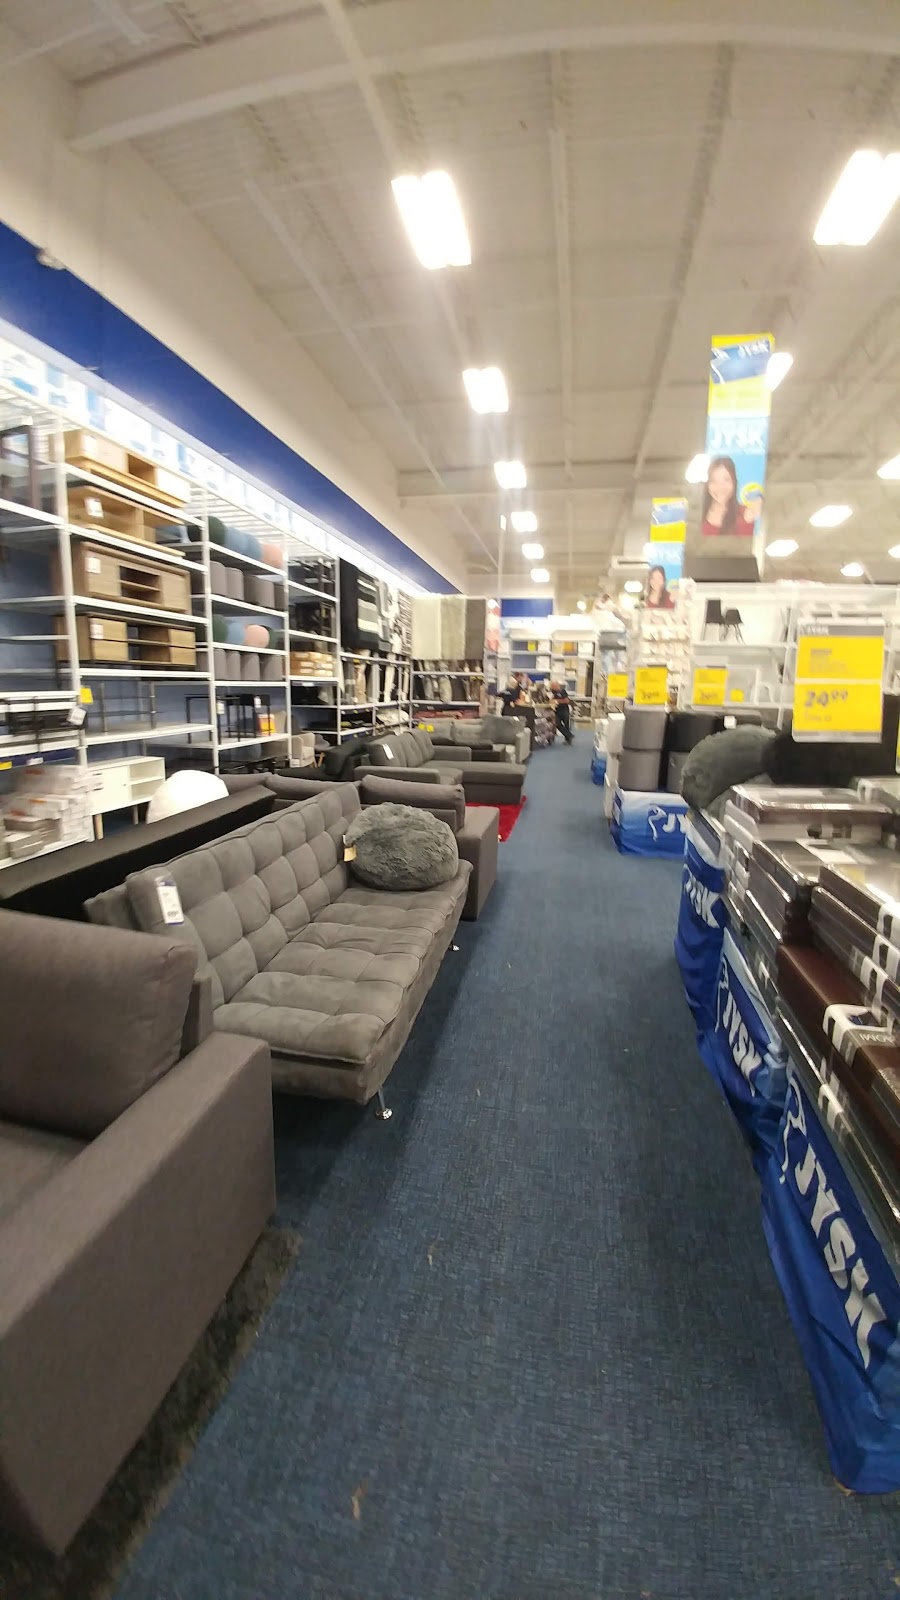 JYSK - London Southdale (Curbside Pickup Only) | furniture store | 3075 Wonderland Rd S Unit A, London, ON N6L 1R4, Canada | 5196686850 OR +1 519-668-6850